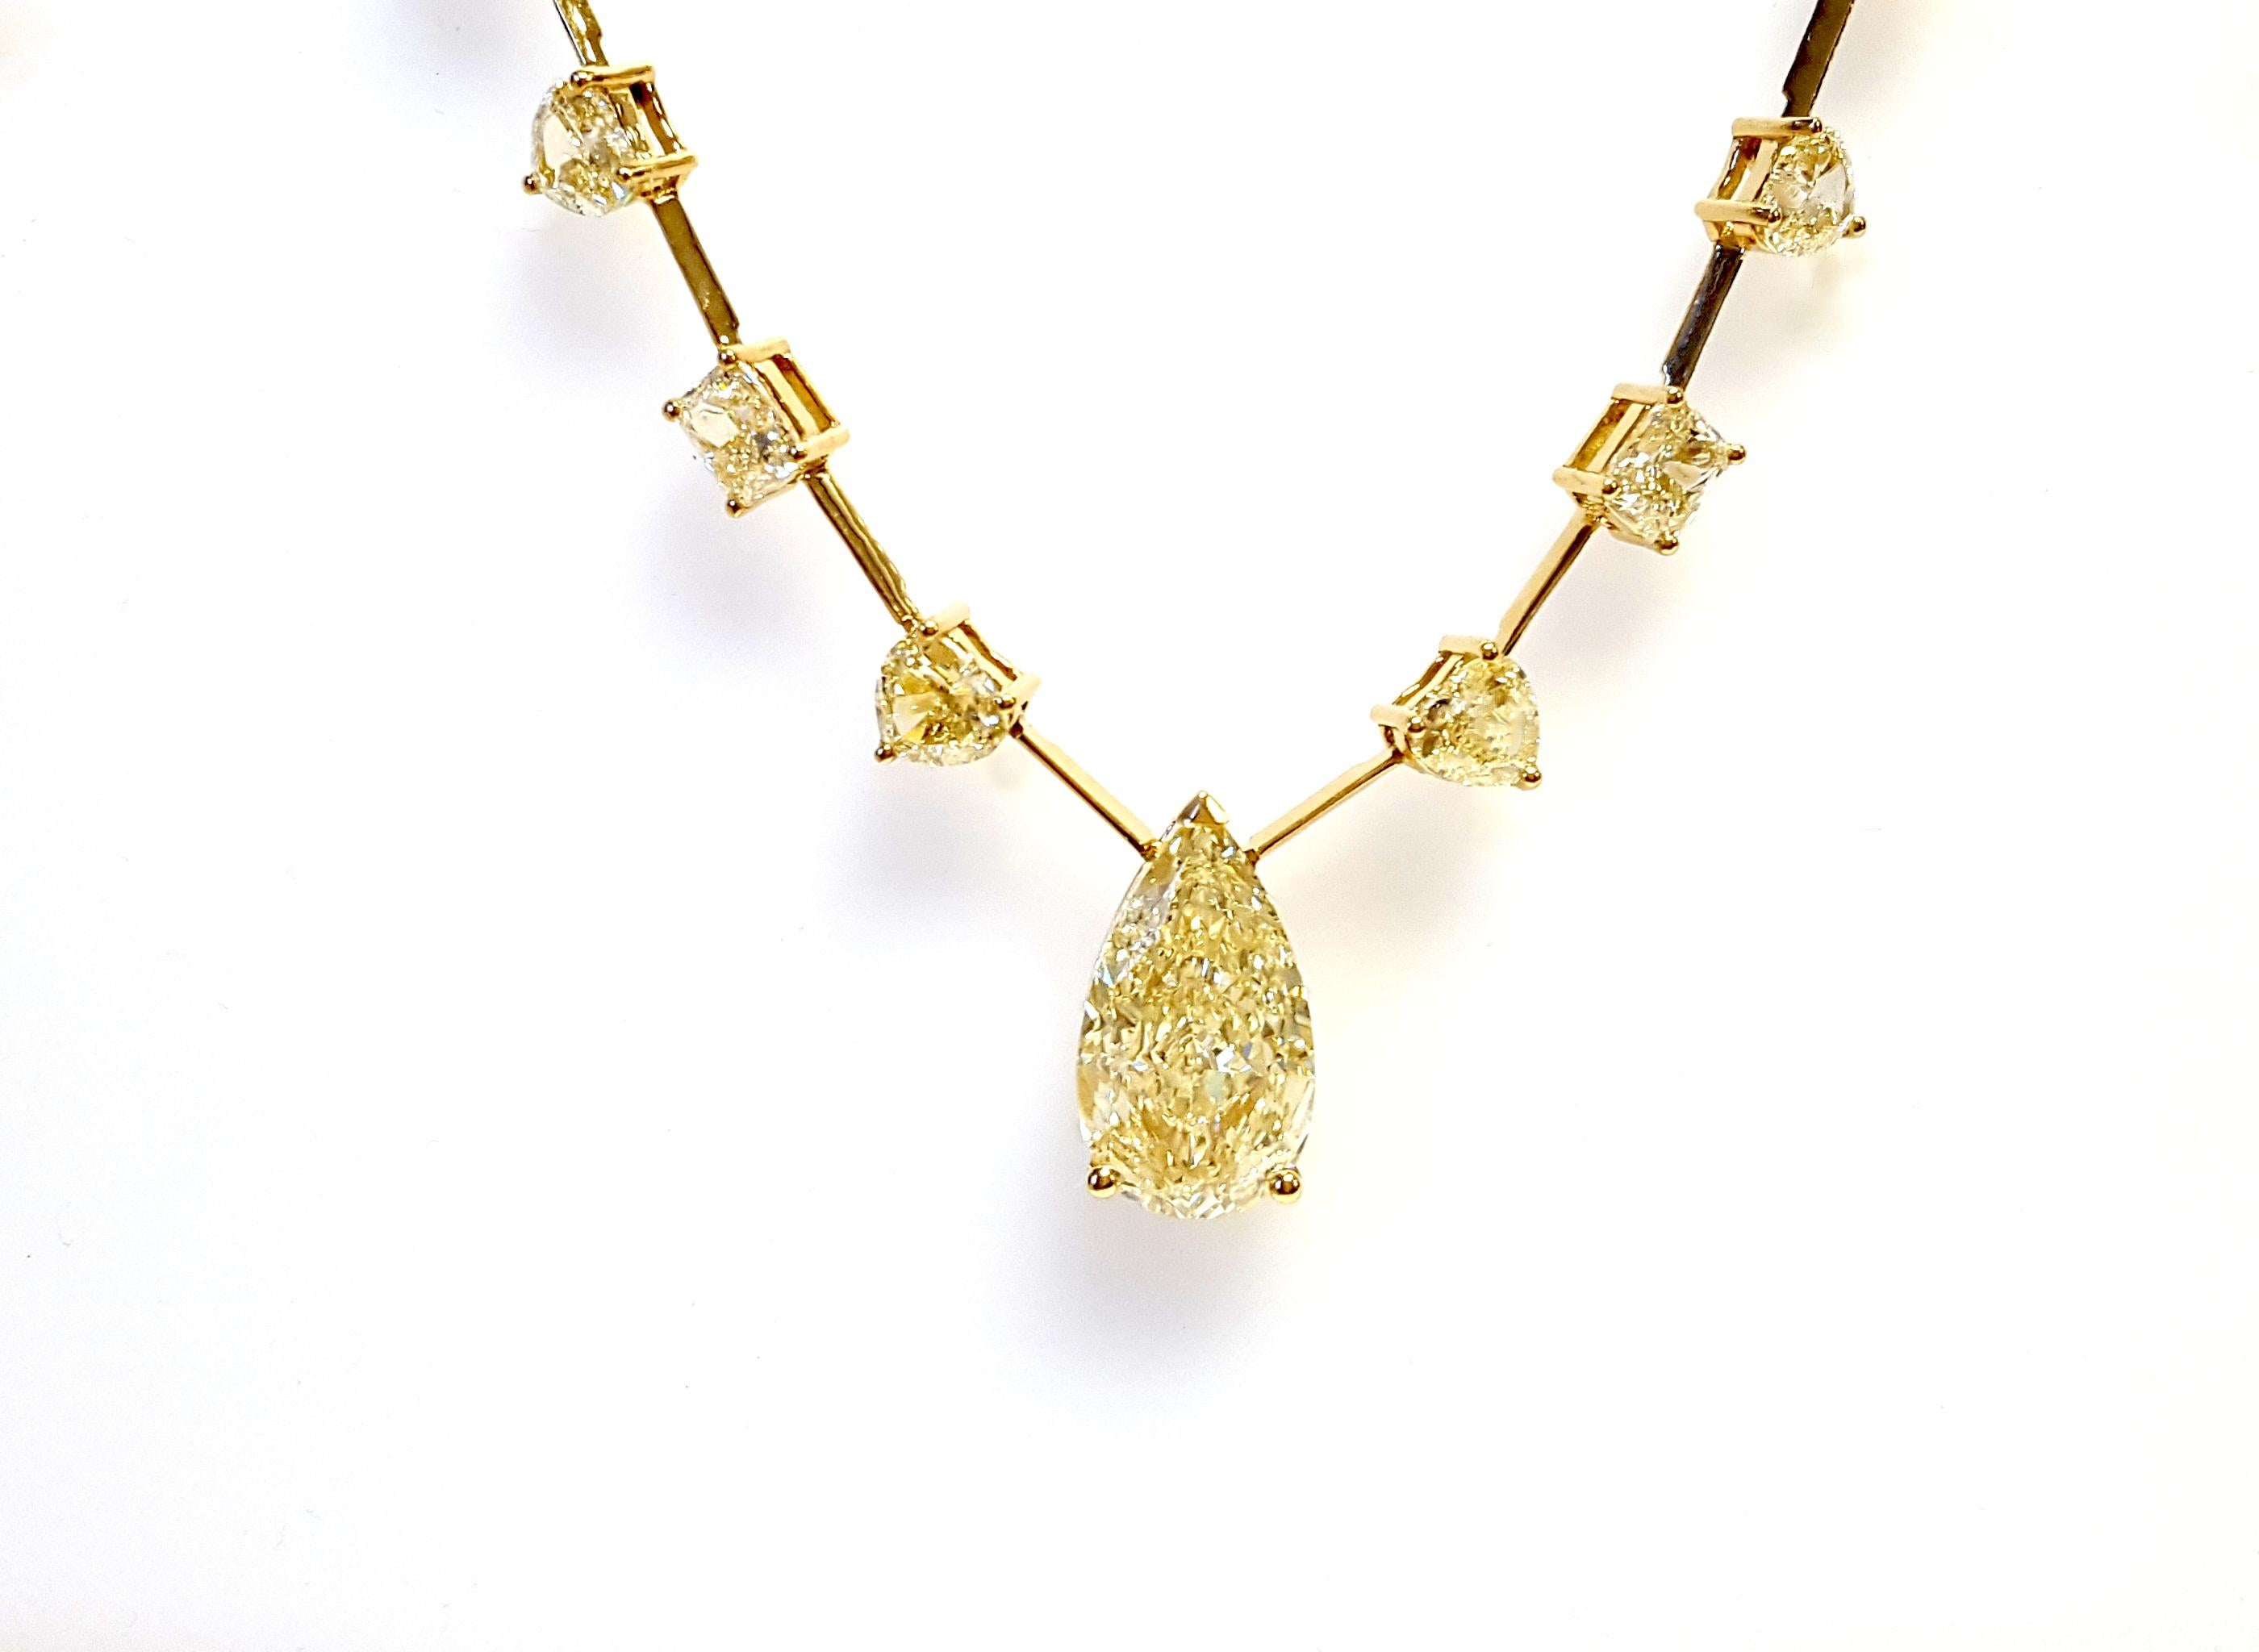 Pear Cut 22.06 Carat Natural Mix Shaped Yellow Diamond Necklace, In 18 Karat Yellow Gold. For Sale